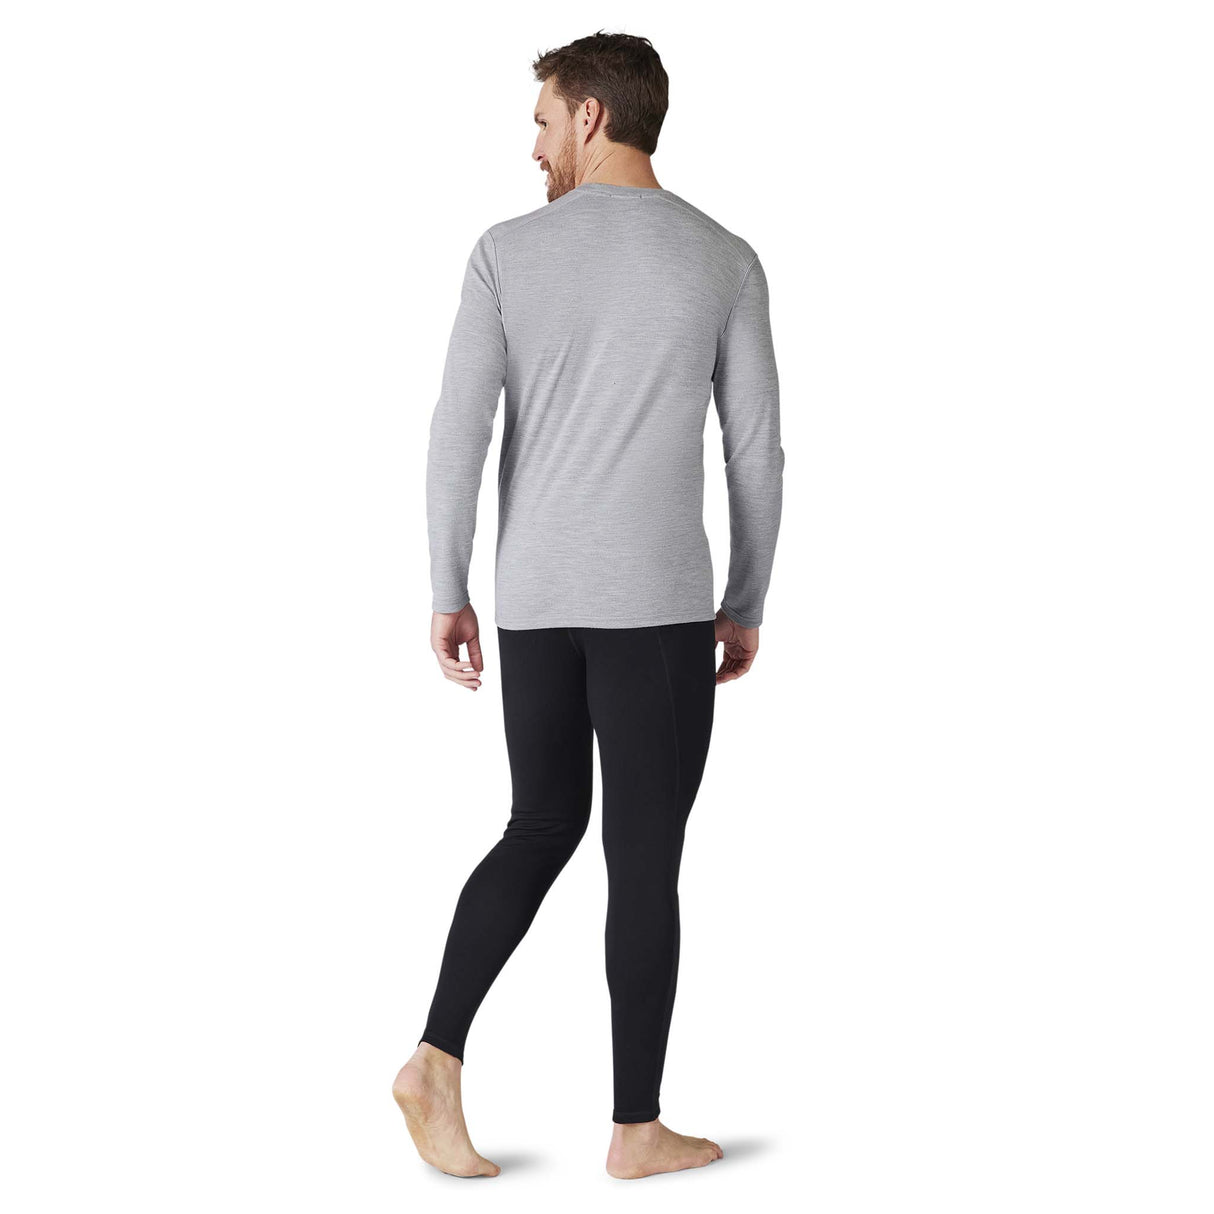 Smartwool Merino 250 Baselayer chandail col rond gris homme dos